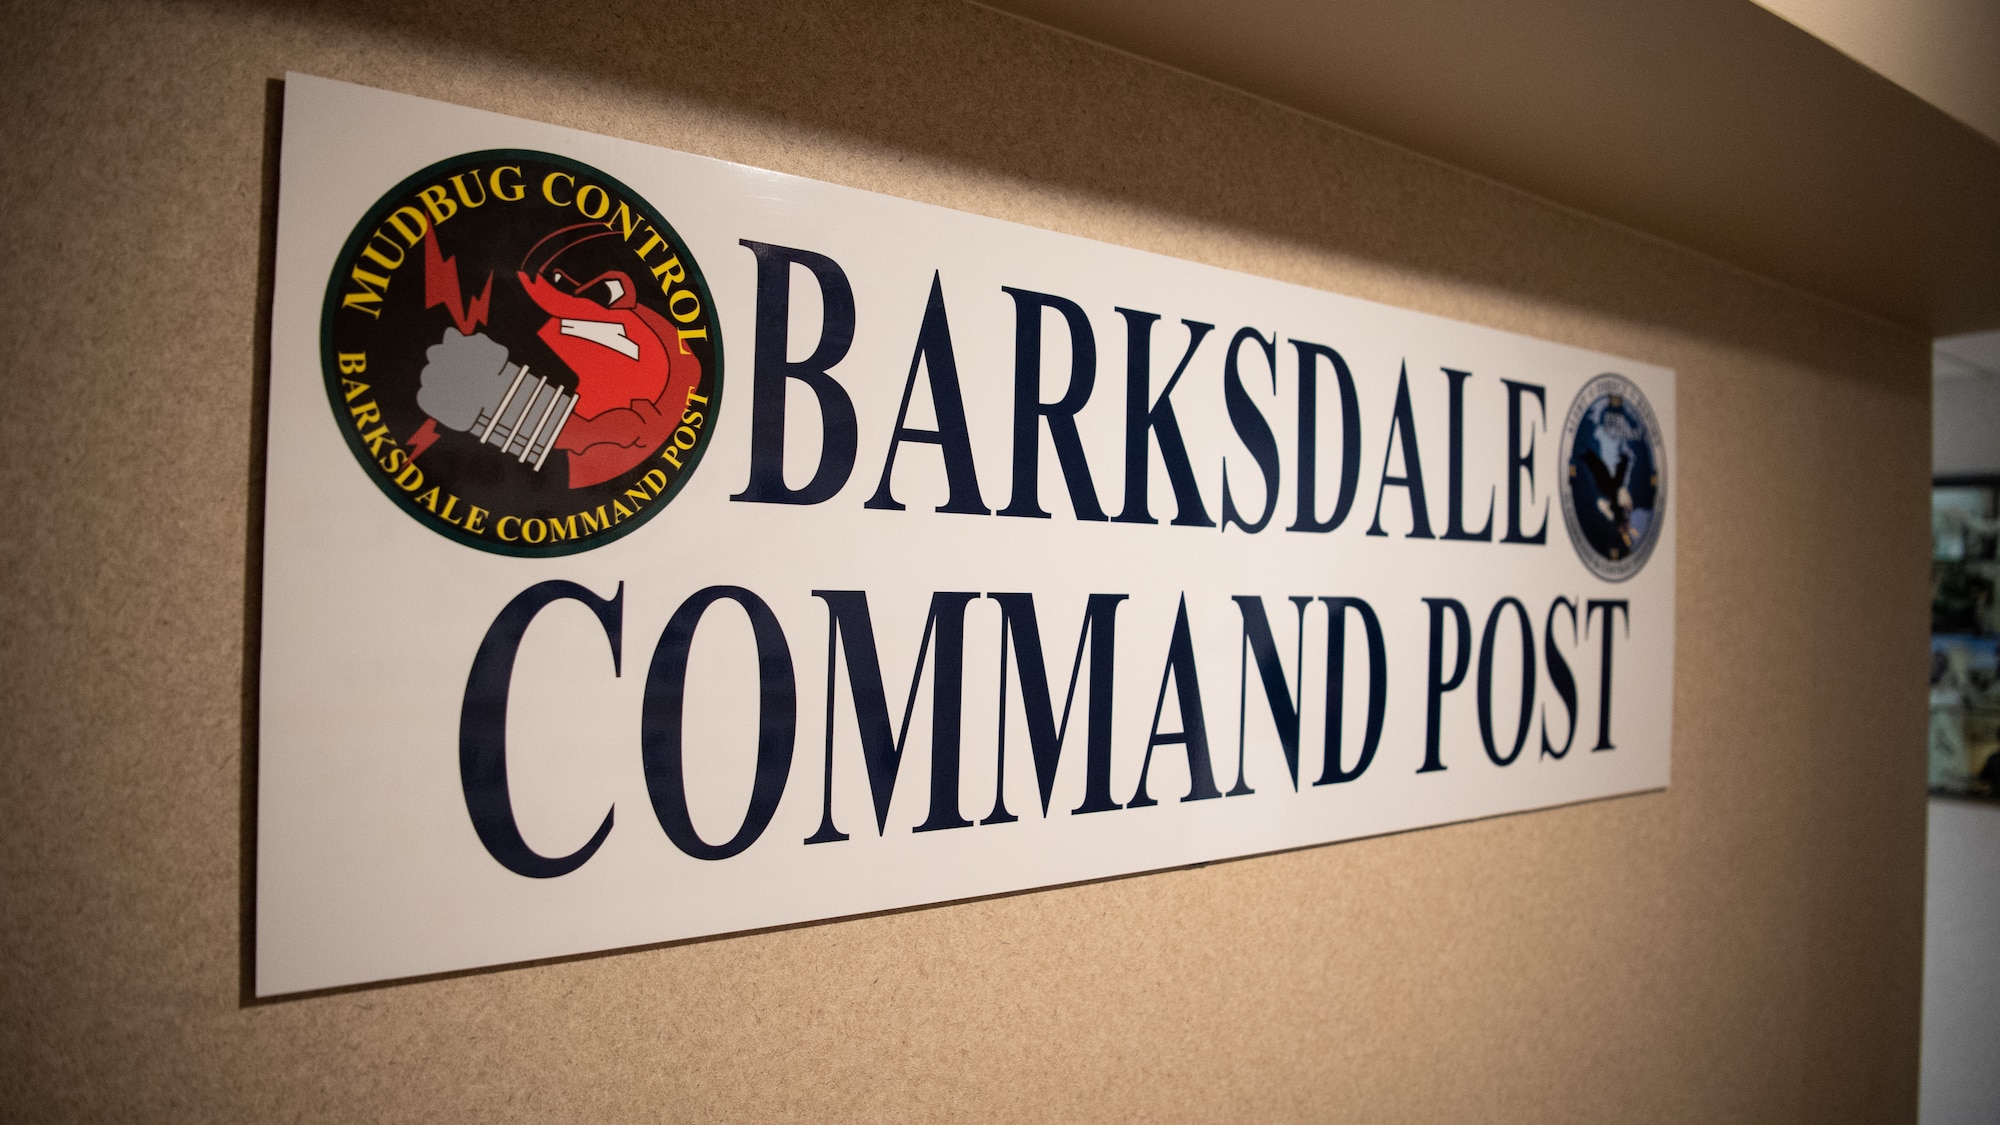 A "Barksdale Command Post" sign hangs at the entrance of the 2nd Bomb Wing command post at Barksdale Air Force Base, La., Sept. 9, 2020. Barksdale's command post is responsible for providing nuclear command and control for military forces. (U.S. Air Force photo by Airman 1st Class Jacob B. Wrightsman)